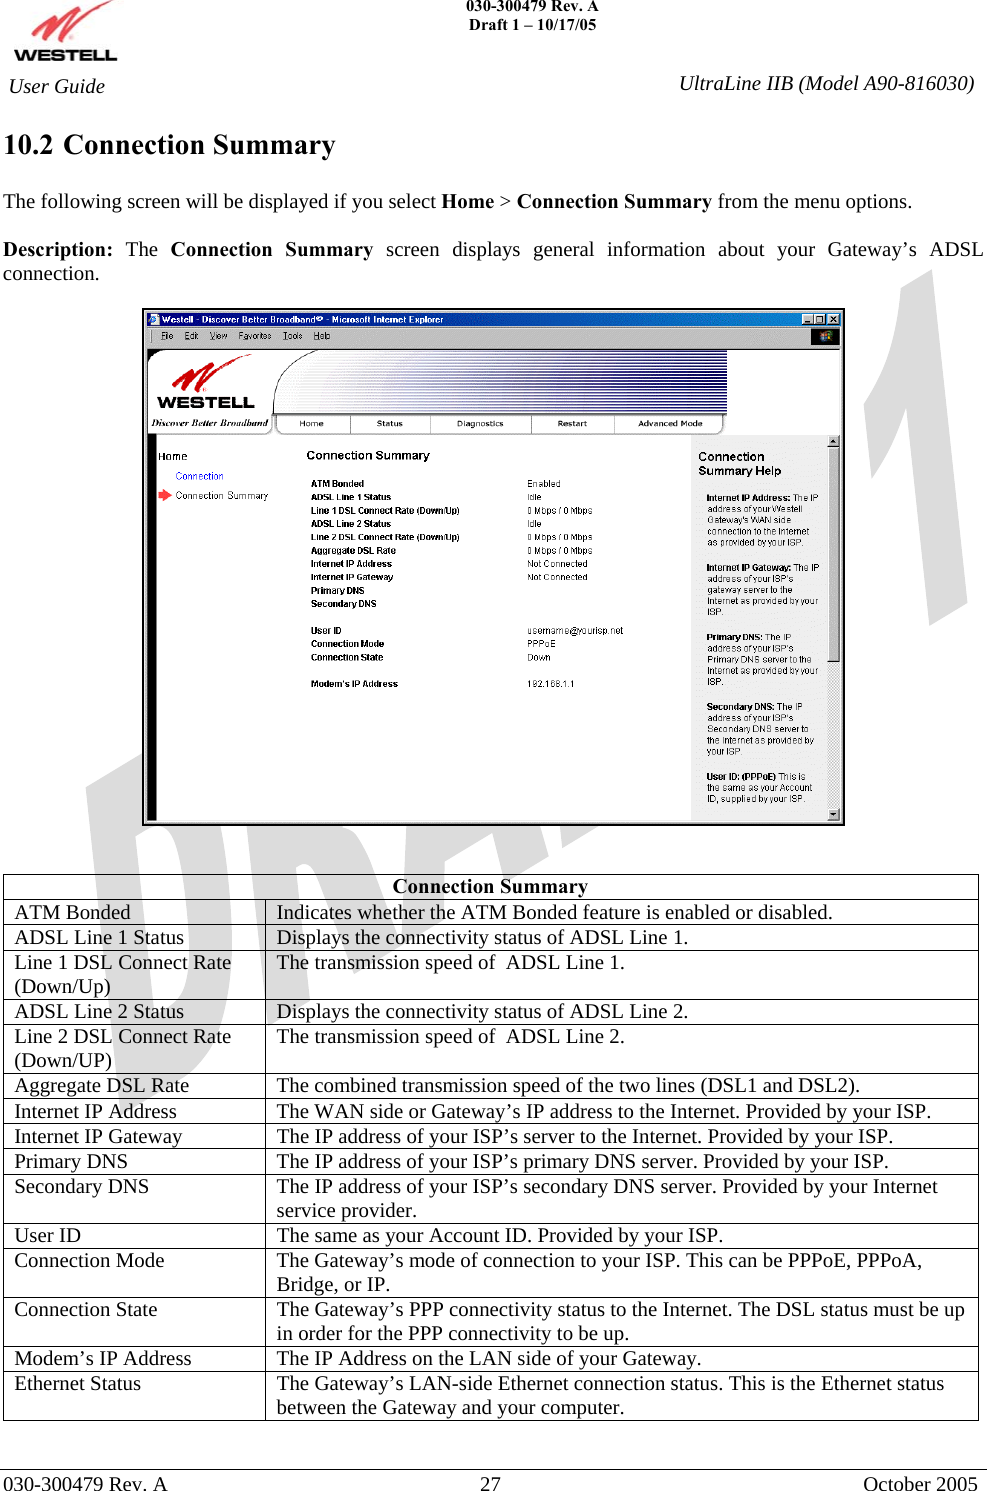    030-300479 Rev. A Draft 1 – 10/17/05   030-300479 Rev. A  27  October 2005  User Guide  UltraLine IIB (Model A90-816030)10.2 Connection Summary  The following screen will be displayed if you select Home &gt; Connection Summary from the menu options.   Description: The Connection Summary screen displays general information about your Gateway’s ADSL connection.     Connection Summary ATM Bonded  Indicates whether the ATM Bonded feature is enabled or disabled. ADSL Line 1 Status  Displays the connectivity status of ADSL Line 1. Line 1 DSL Connect Rate (Down/Up)  The transmission speed of  ADSL Line 1. ADSL Line 2 Status  Displays the connectivity status of ADSL Line 2. Line 2 DSL Connect Rate (Down/UP)  The transmission speed of  ADSL Line 2. Aggregate DSL Rate  The combined transmission speed of the two lines (DSL1 and DSL2). Internet IP Address  The WAN side or Gateway’s IP address to the Internet. Provided by your ISP. Internet IP Gateway  The IP address of your ISP’s server to the Internet. Provided by your ISP. Primary DNS  The IP address of your ISP’s primary DNS server. Provided by your ISP. Secondary DNS  The IP address of your ISP’s secondary DNS server. Provided by your Internet service provider. User ID  The same as your Account ID. Provided by your ISP. Connection Mode  The Gateway’s mode of connection to your ISP. This can be PPPoE, PPPoA, Bridge, or IP. Connection State  The Gateway’s PPP connectivity status to the Internet. The DSL status must be up in order for the PPP connectivity to be up. Modem’s IP Address  The IP Address on the LAN side of your Gateway. Ethernet Status  The Gateway’s LAN-side Ethernet connection status. This is the Ethernet status between the Gateway and your computer.  